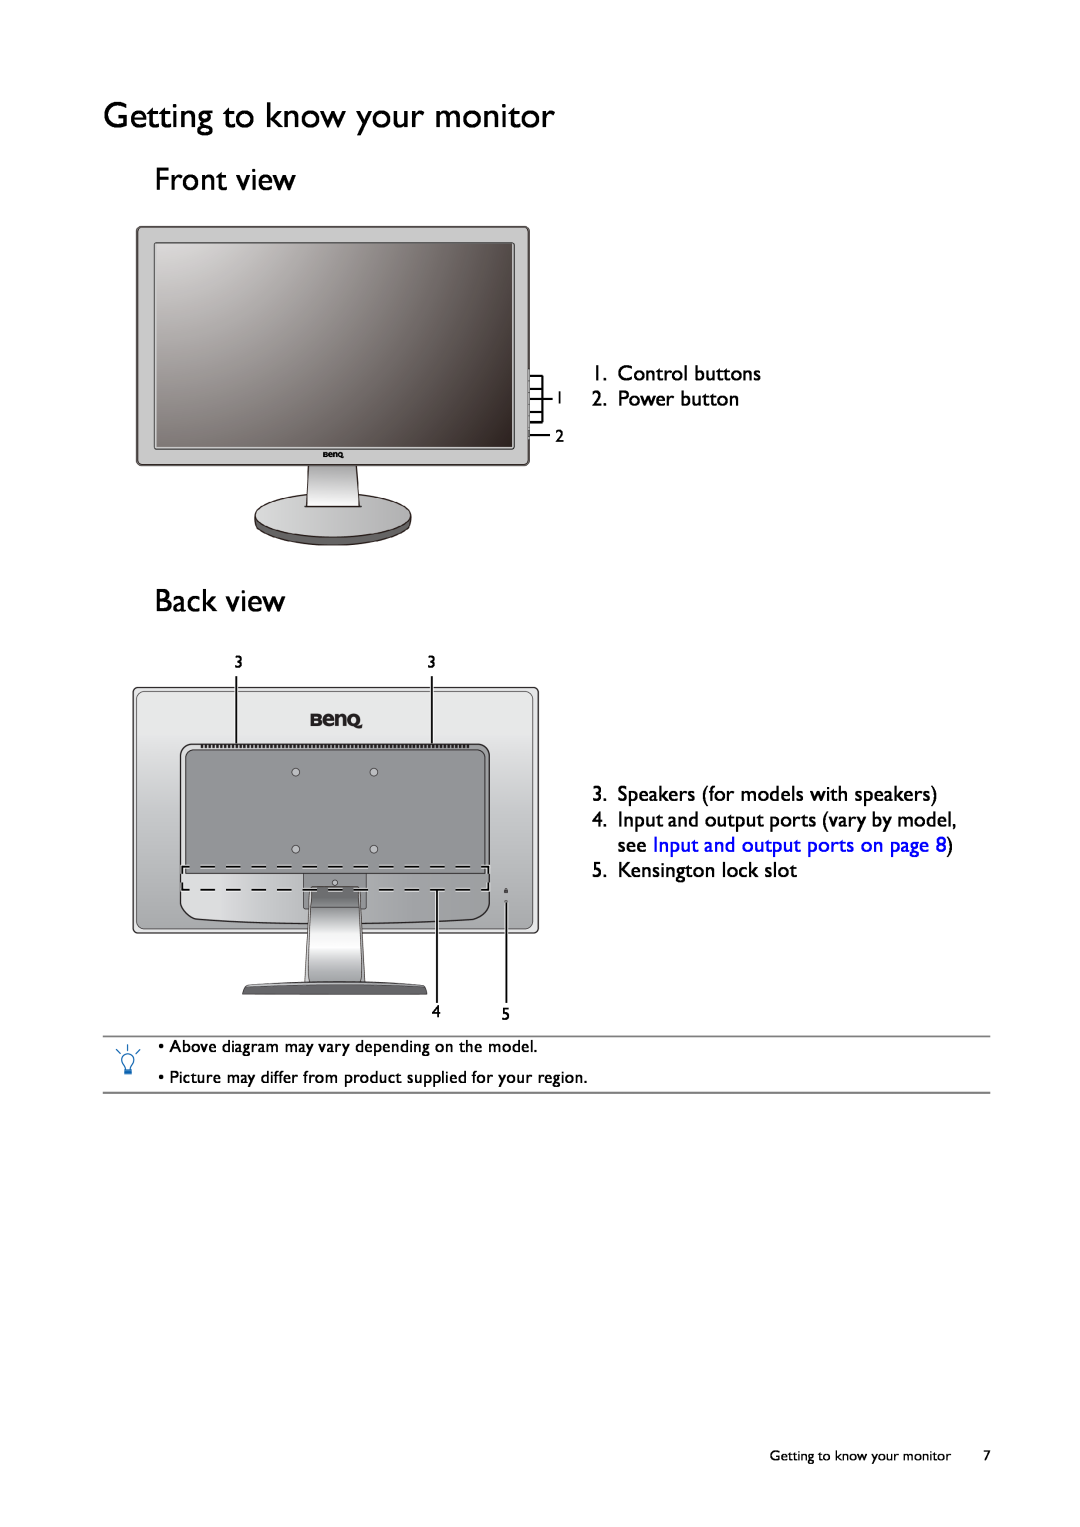 BenQ GL50, G50 Getting to know your monitor, Front view, Back view, Above diagram may vary depending on the model 